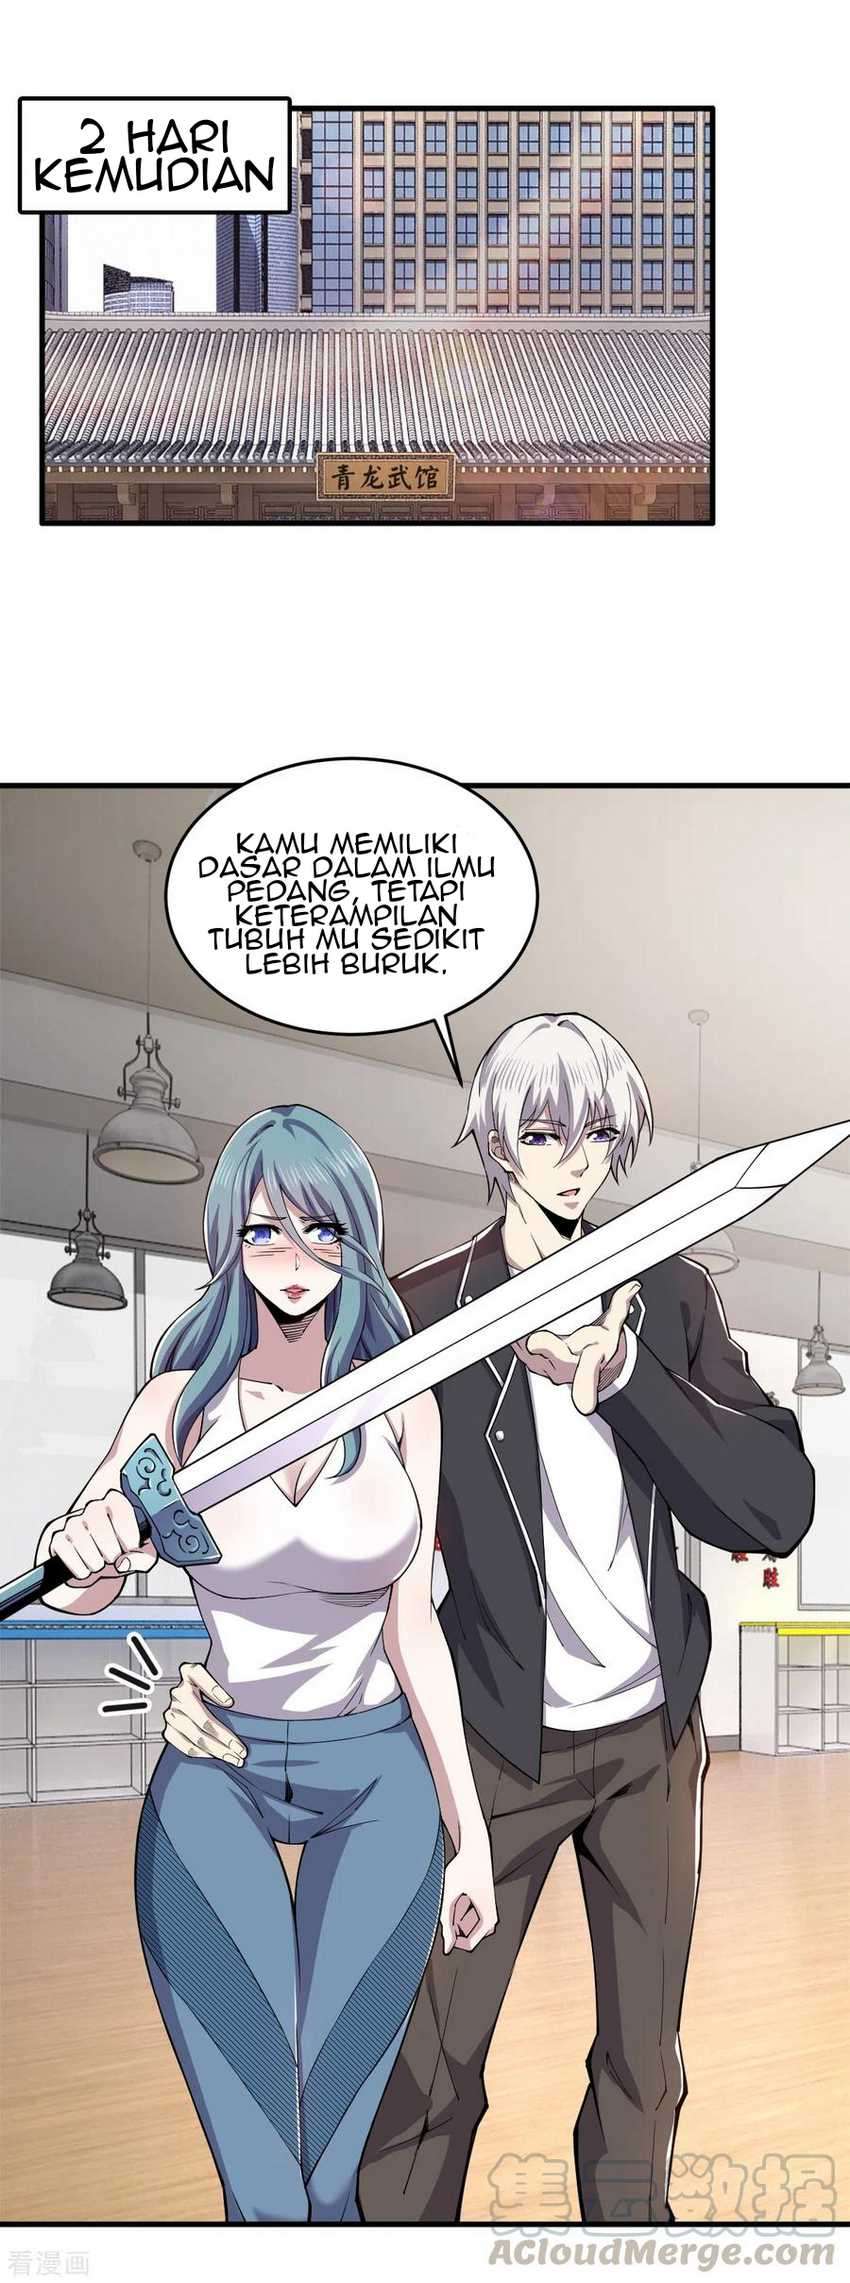 Rebirth of The Sword God Returns Chapter 40